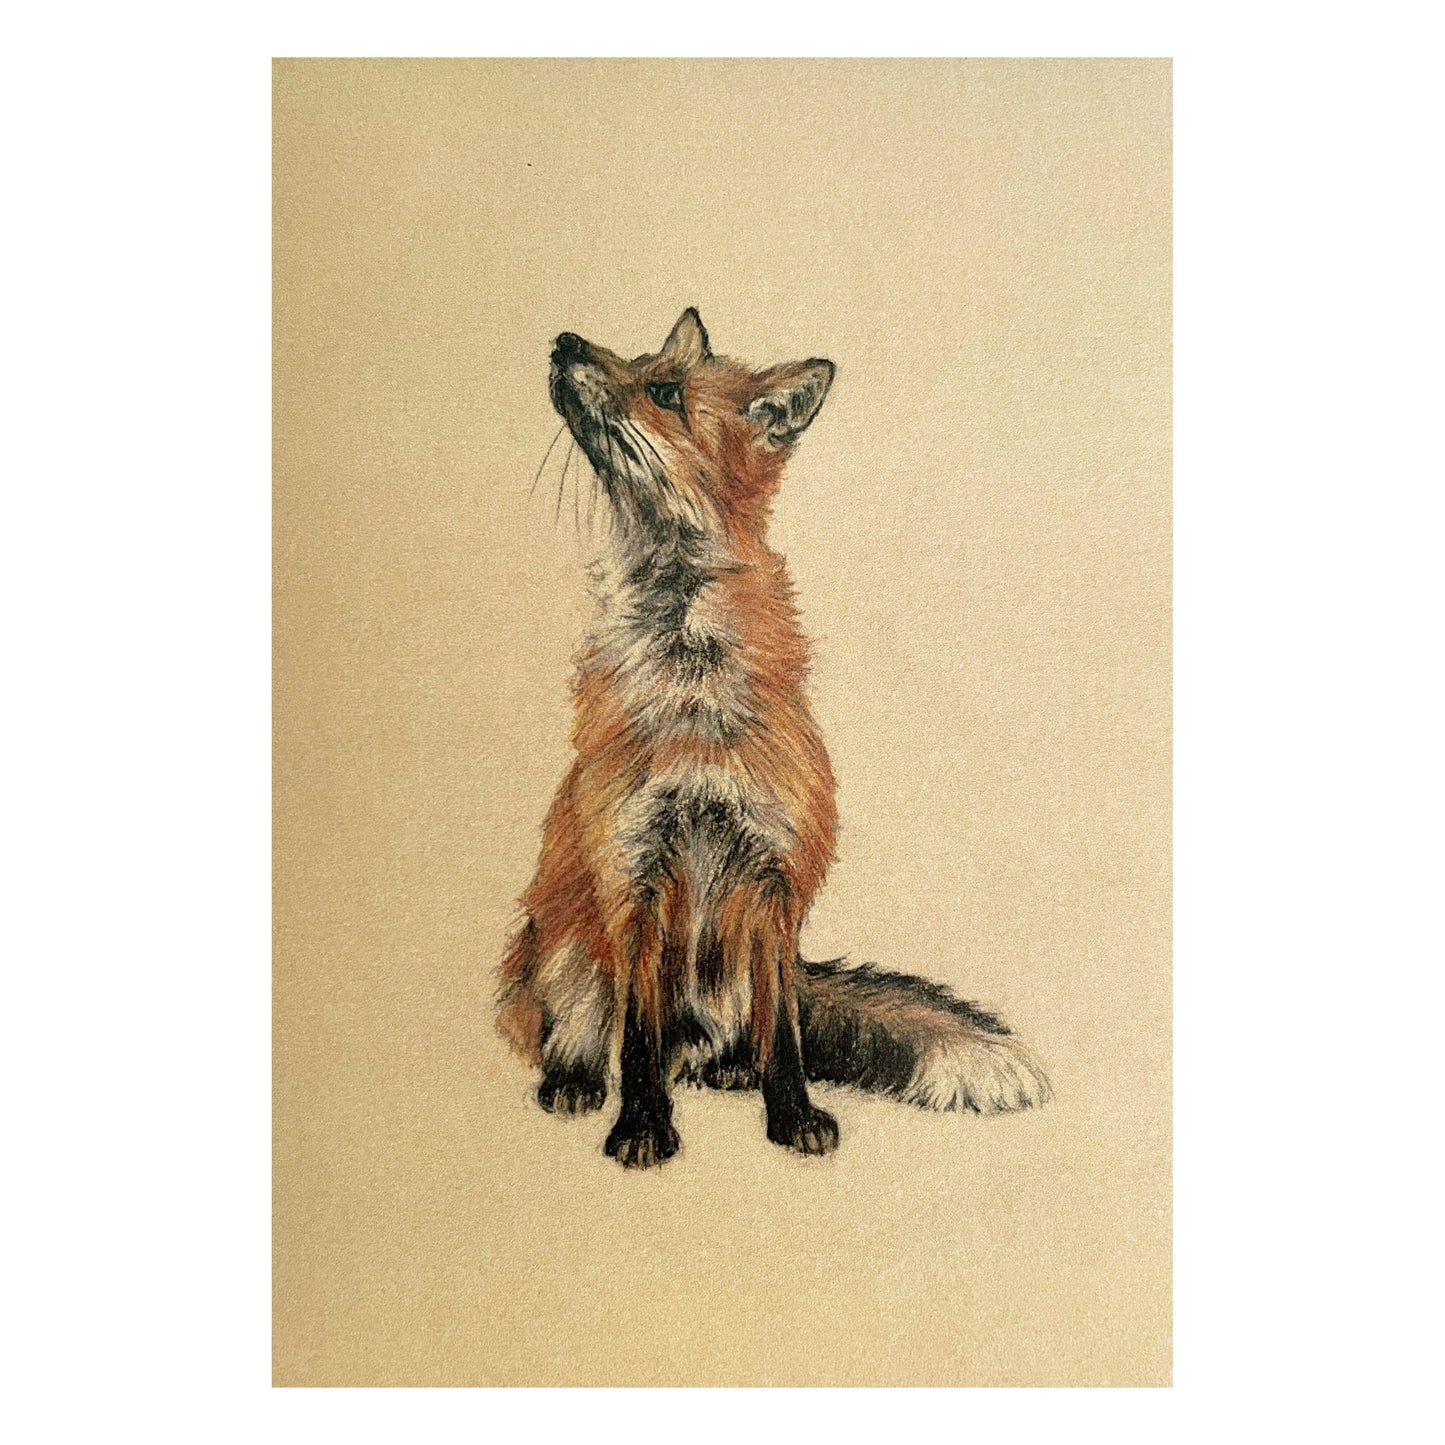 "Seated Fox" Signed Limited Edition Giclée Print